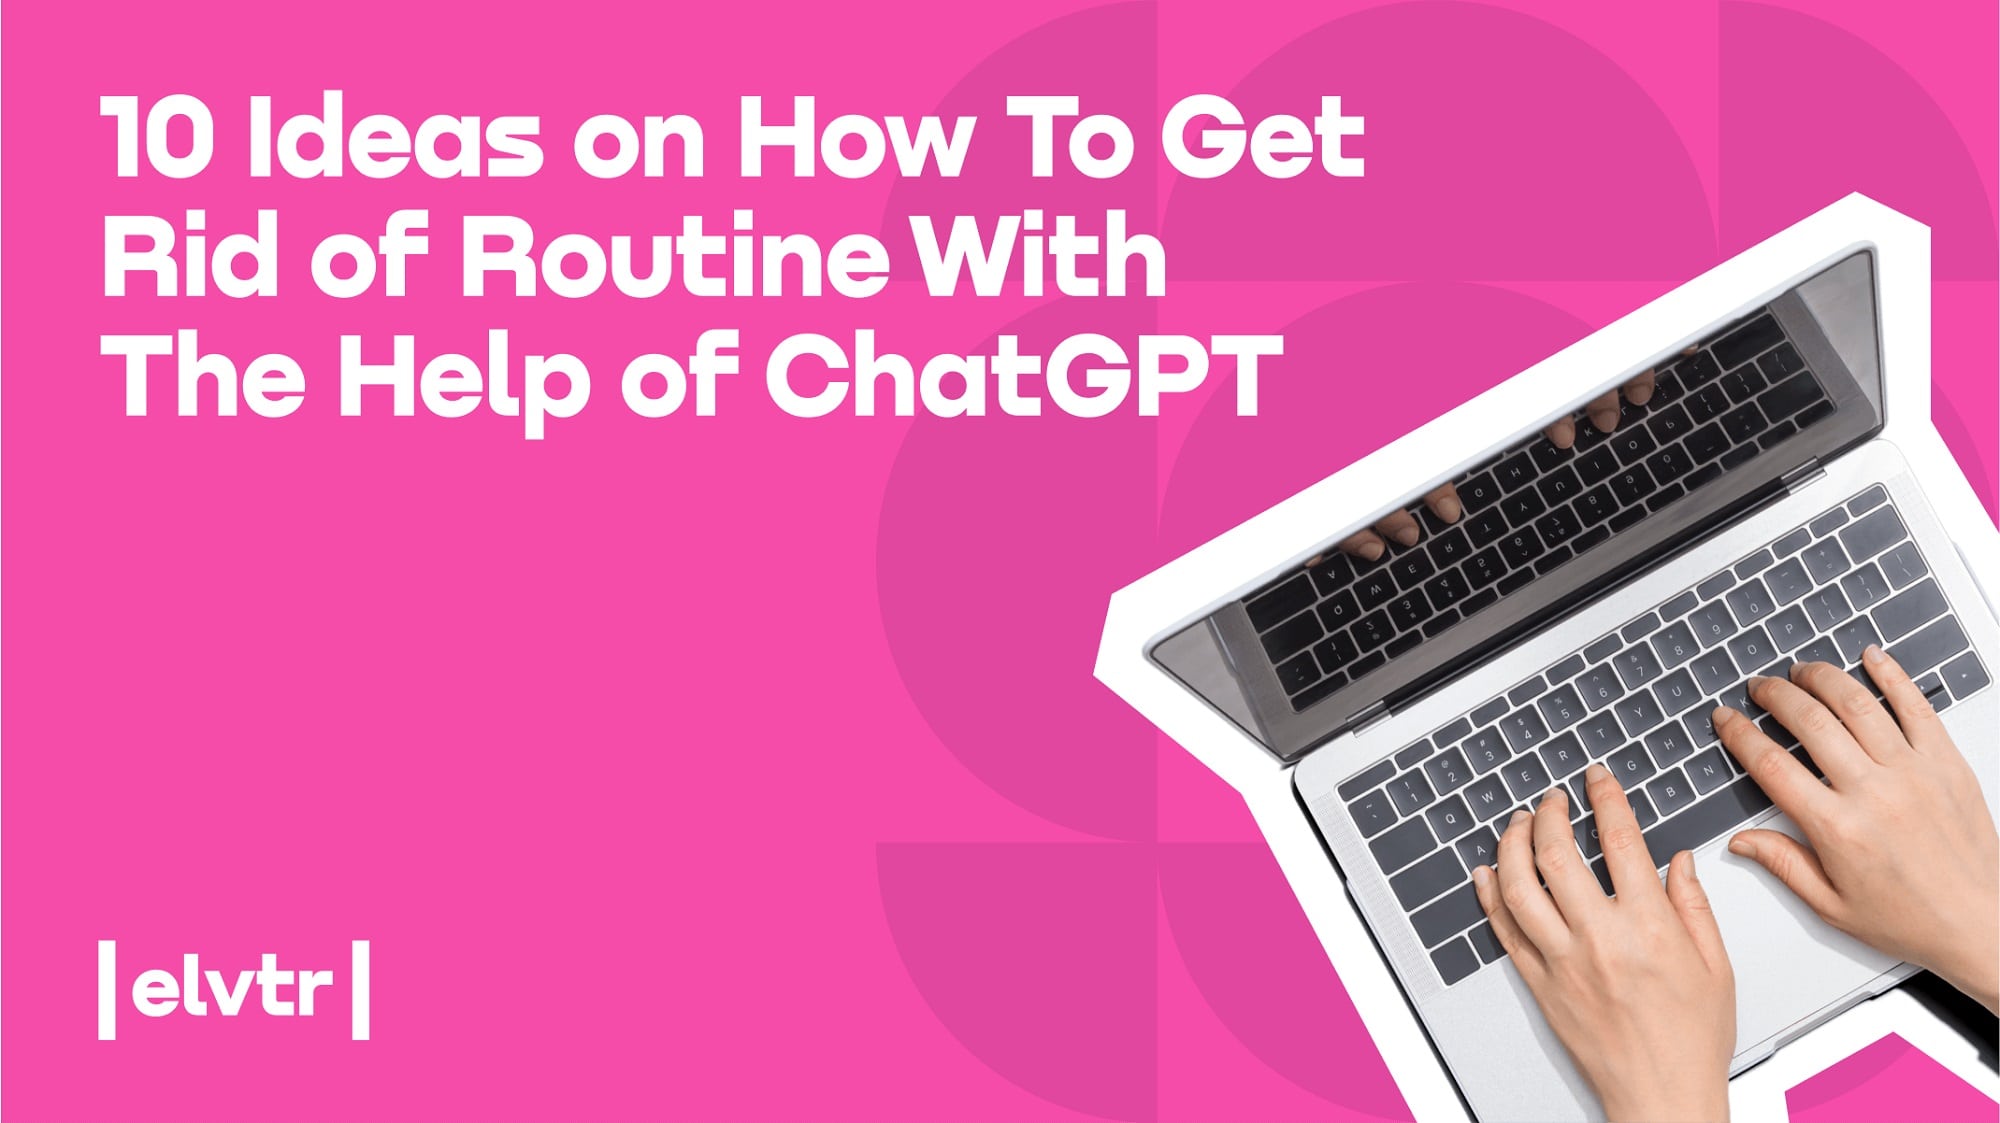 10 Ideas on How To Get Rid of Routine With The Help of ChatGPT image